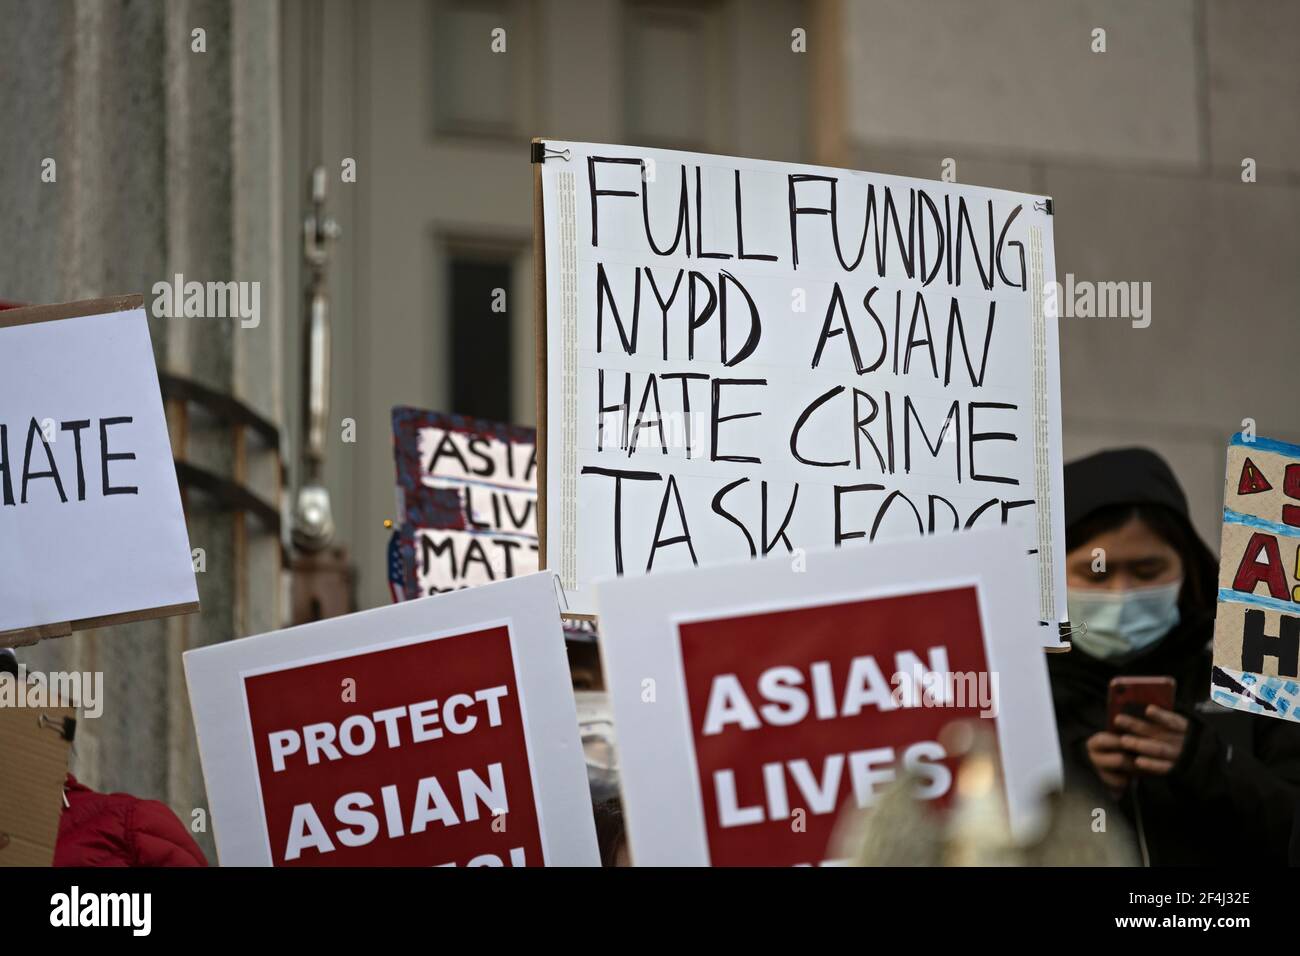 Brooklyn, New York, USA. 21 March 2021 Sign calling for full funding of NYPD Asian hate crime task force is held aloft during anti-Asian violence rally on steps of Brooklyn Borough Hall after recent attacks against Asian-Americans in New York City and across the U.S. during the COVID-19  pandemic. Credit: Joseph Reid/Alamy Live News Stock Photo